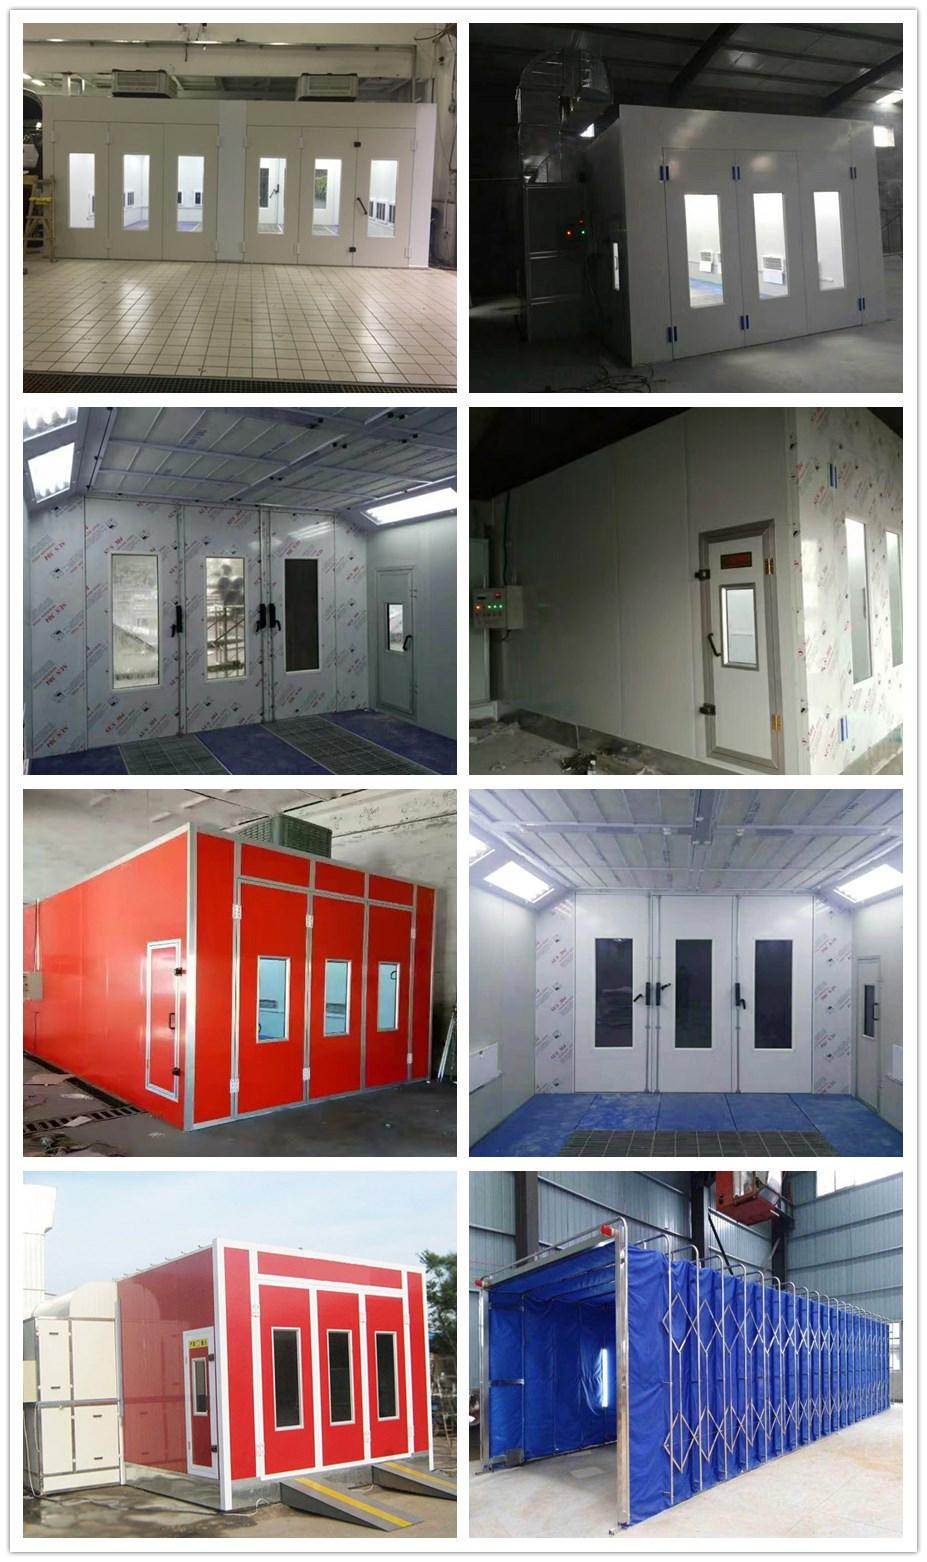 Car Wash Equipment Furniture Paint Booths Inflatable